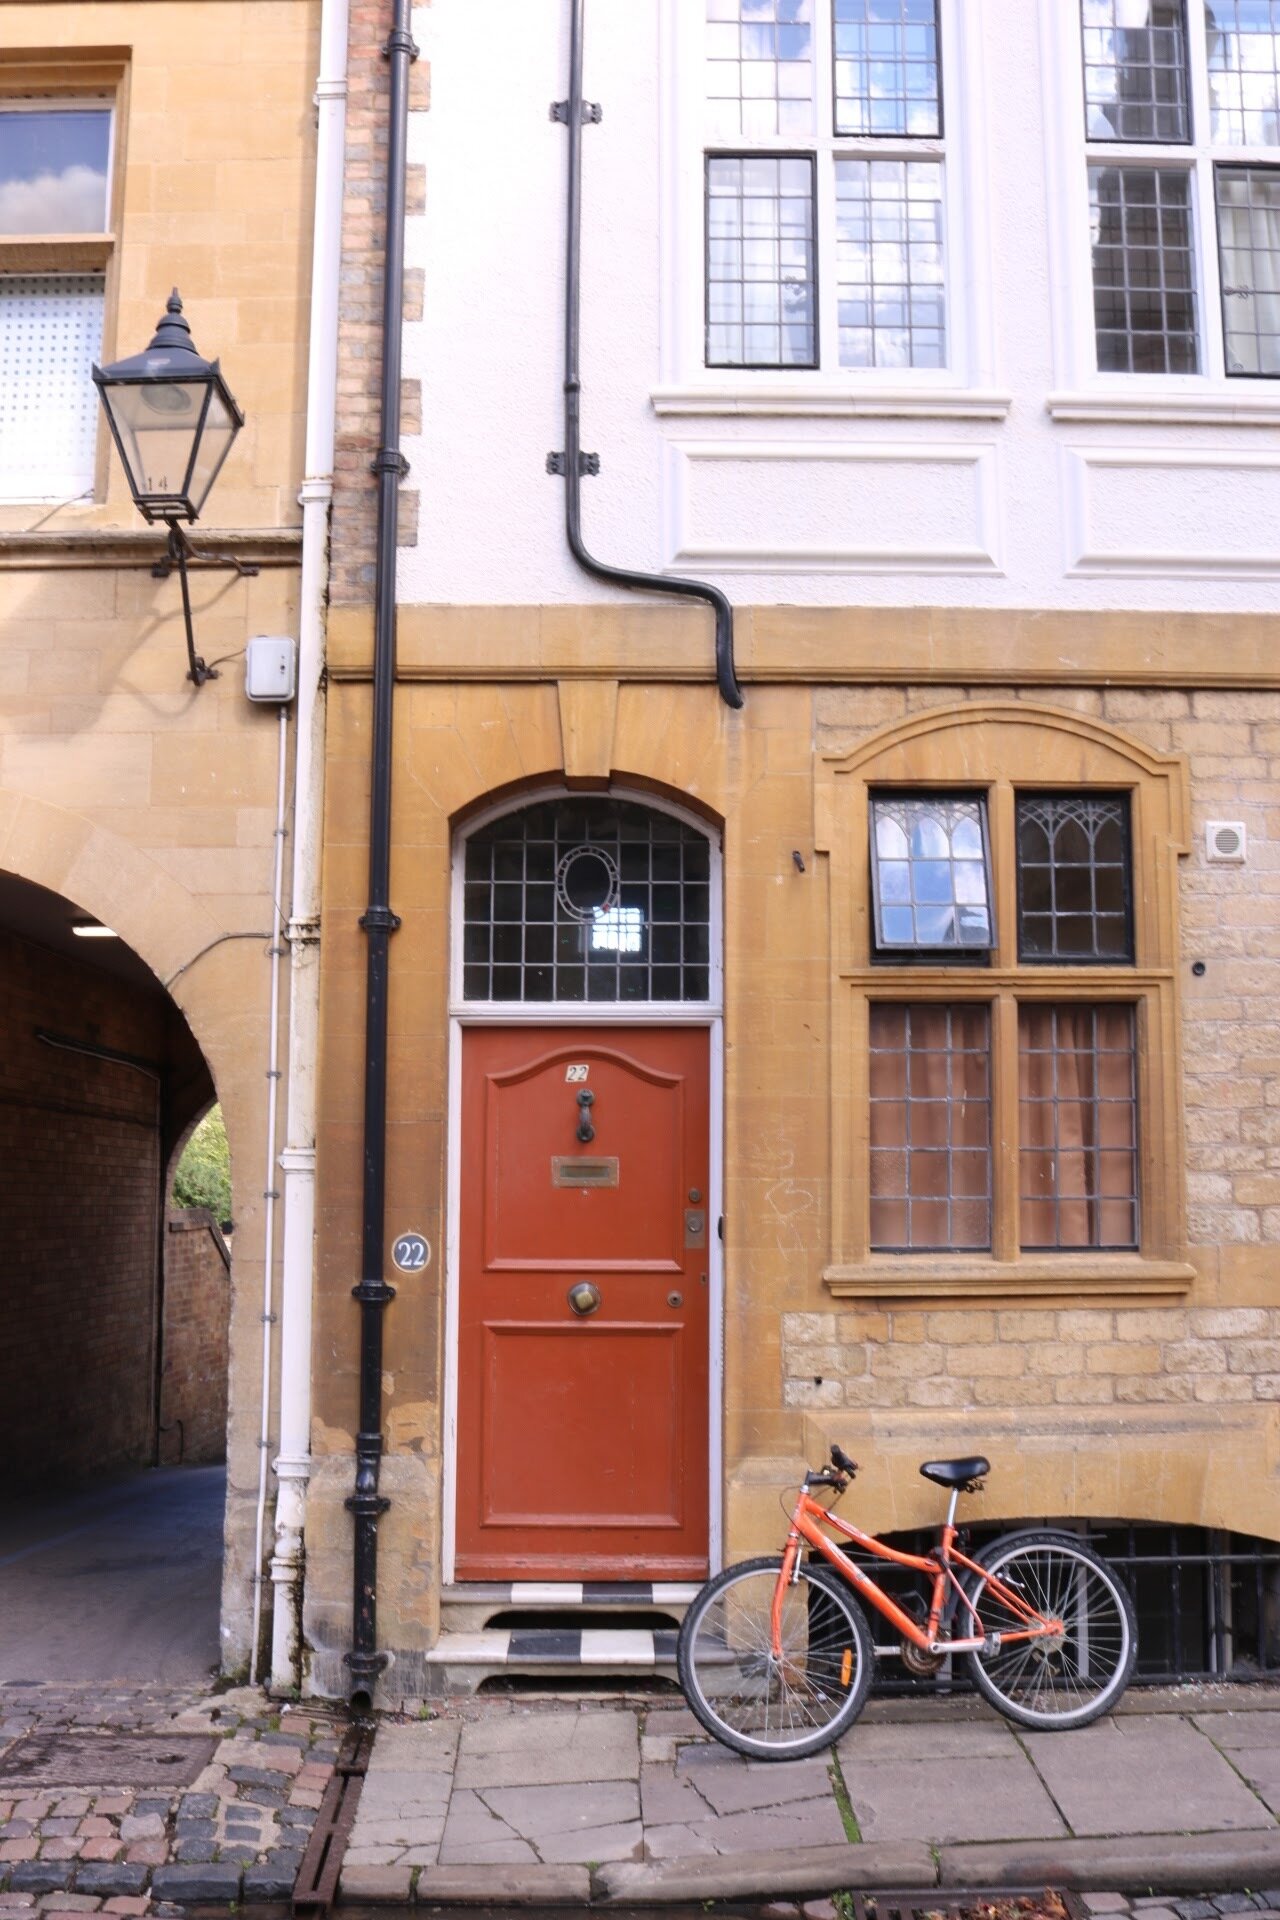 24 hours in Oxford: An Oxford Day Trip Itinerary | Helena Bradbury Travel Blogger | Oxford day trip | day trip to Oxford | Oxford travel guide | Oxford day trip itinerary | Things to see and do | where to eat | best pubs in Oxford | Oxford itinerary…